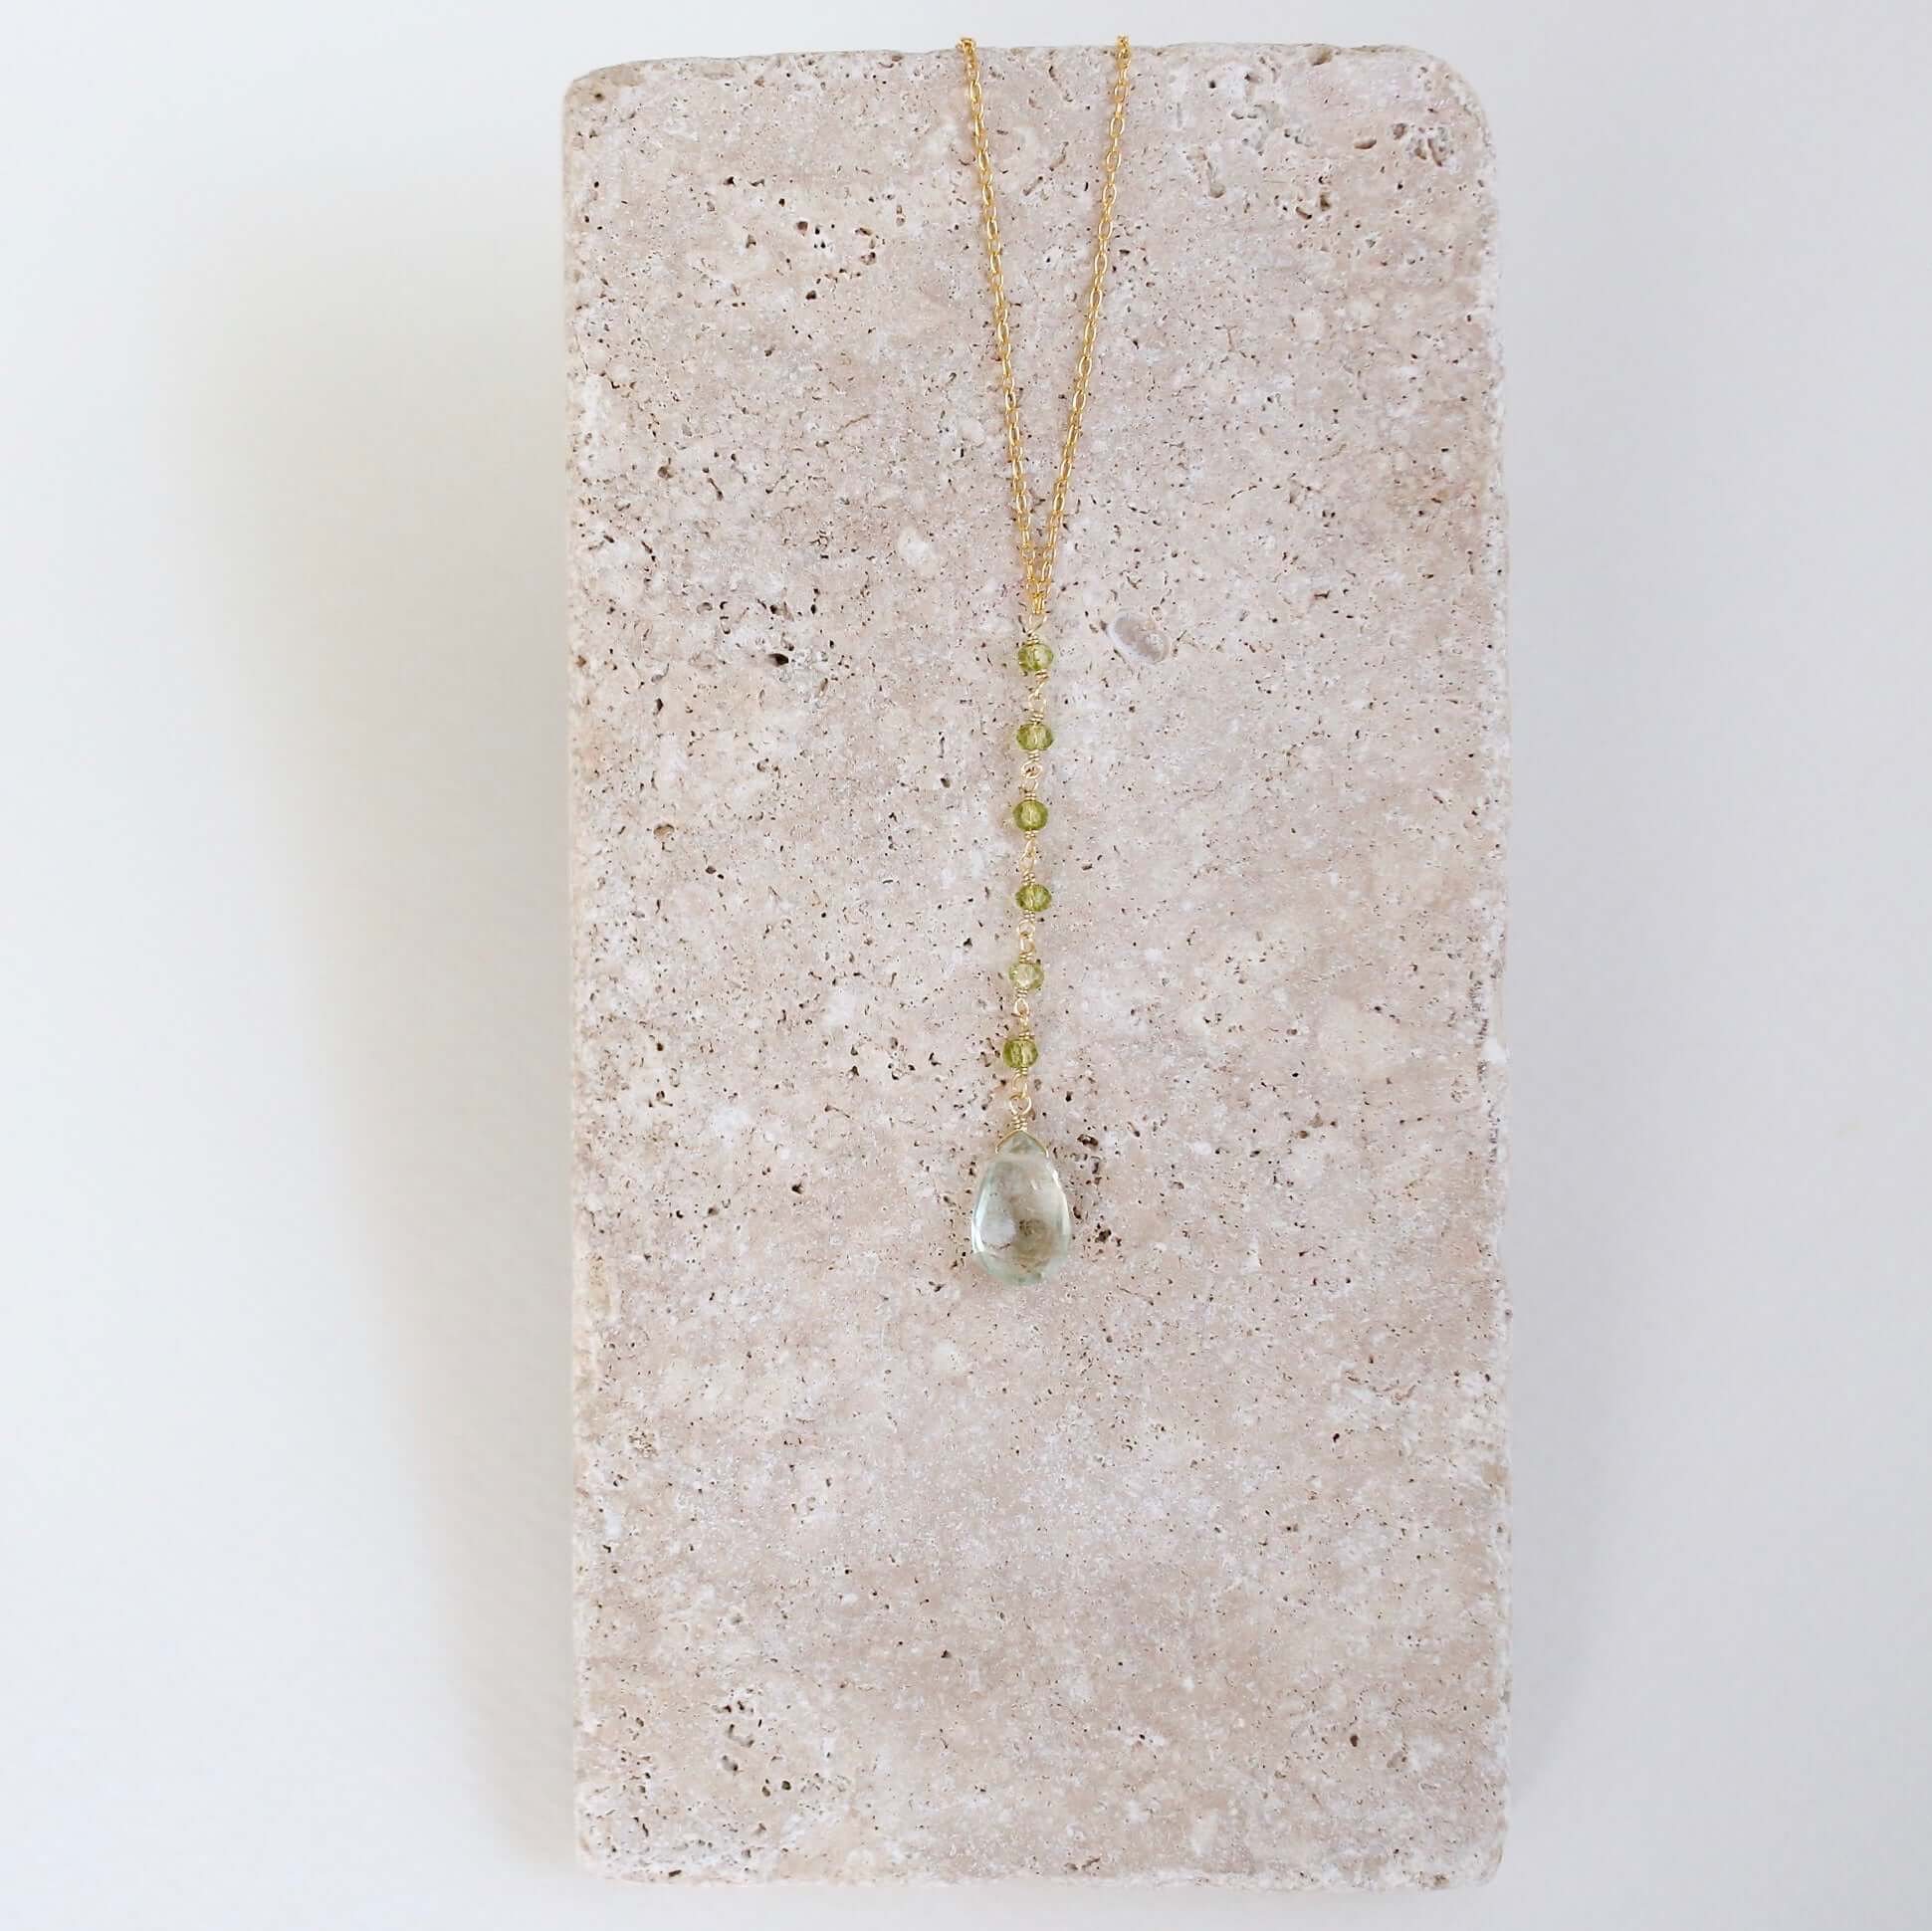 Gold Yoga Pendant with Green Amethyst Gemstones Necklace